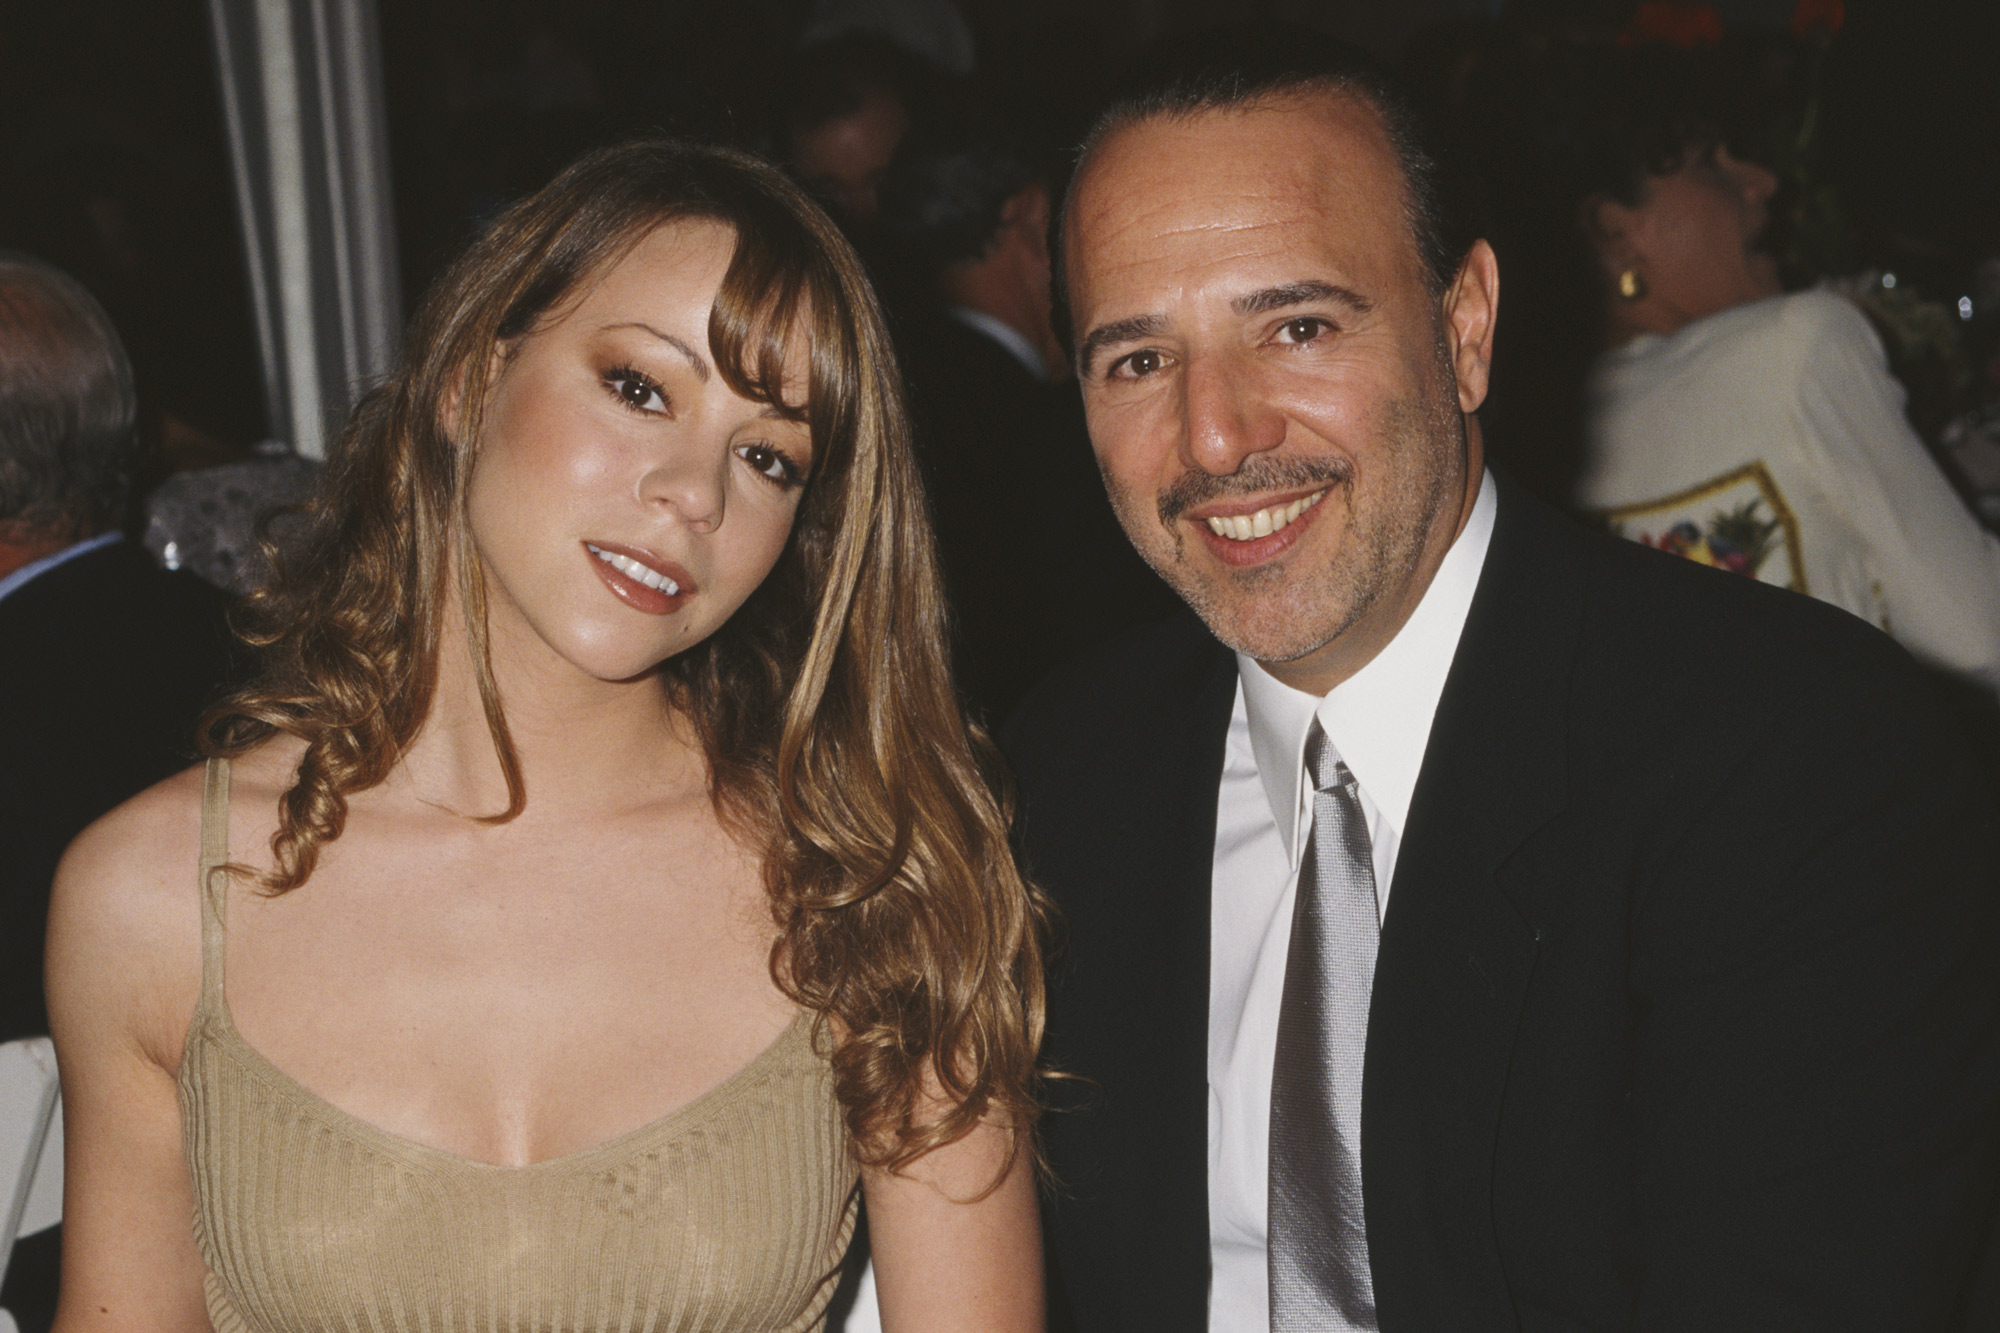 Mariah Carey's exhusband Tommy Mottola wishes her well as she teases